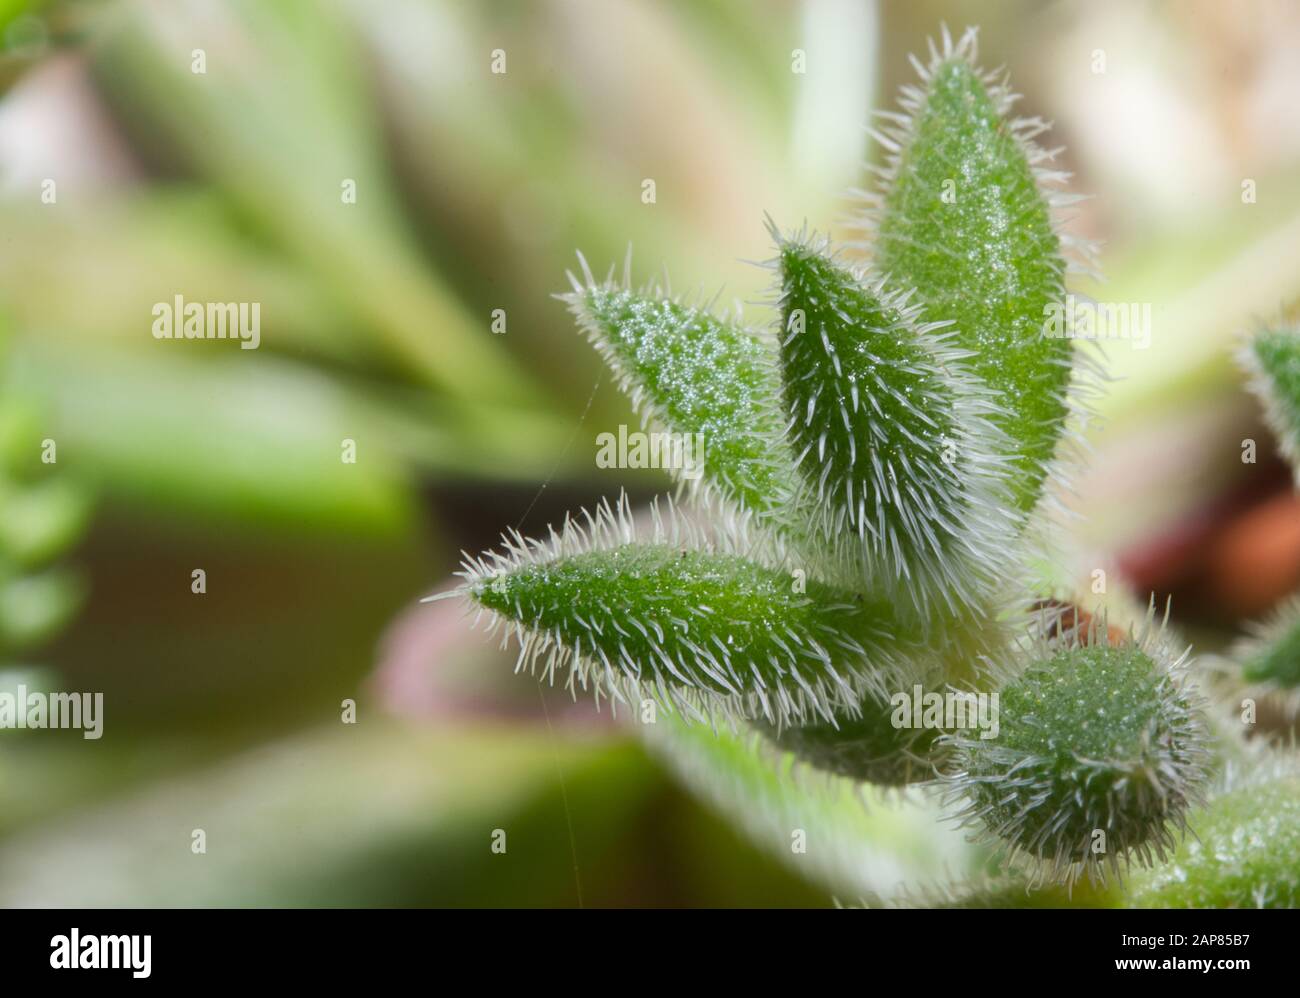 A Close up shot of a green and fuzzy succulent species Stock Photo